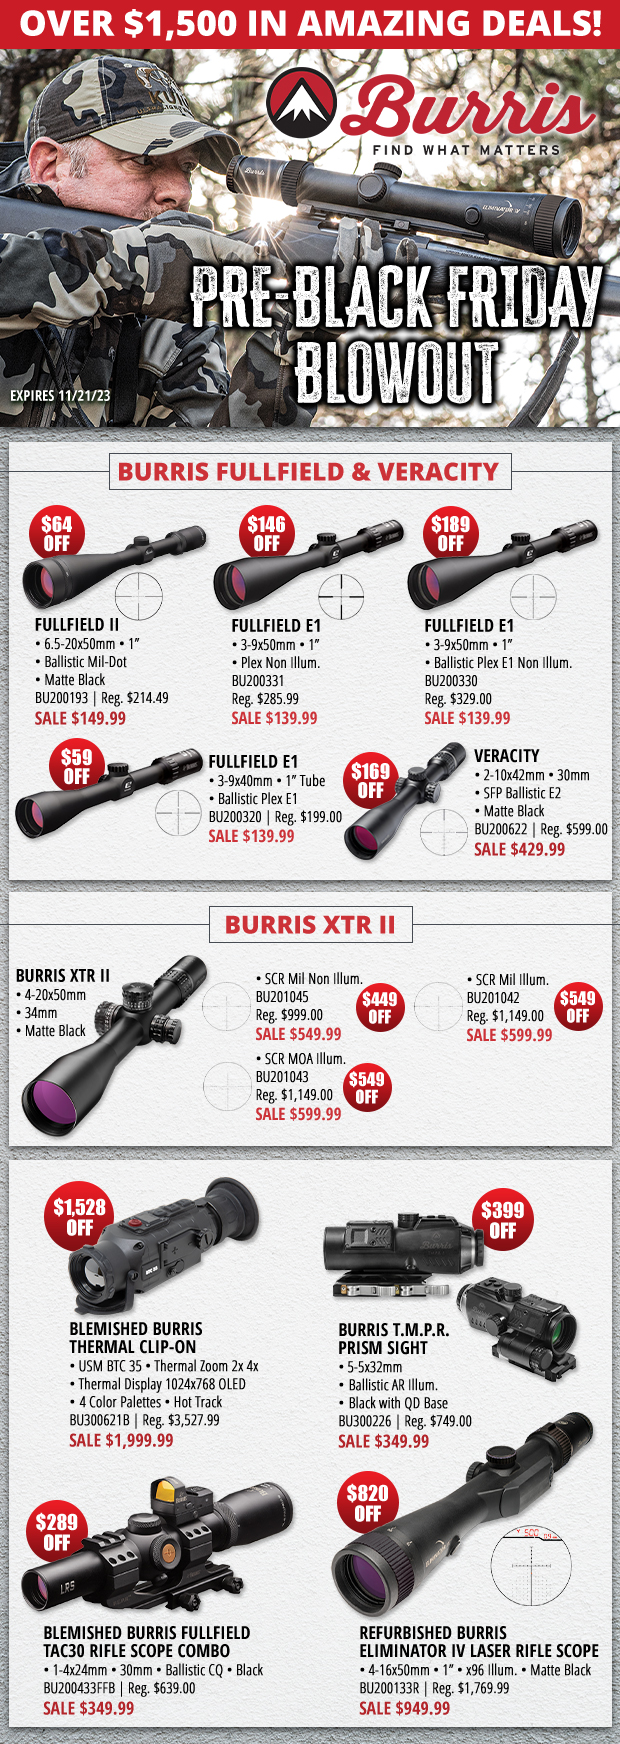 Over $1,500 in Deals with the Burris Pre-Black Friday Blowout!